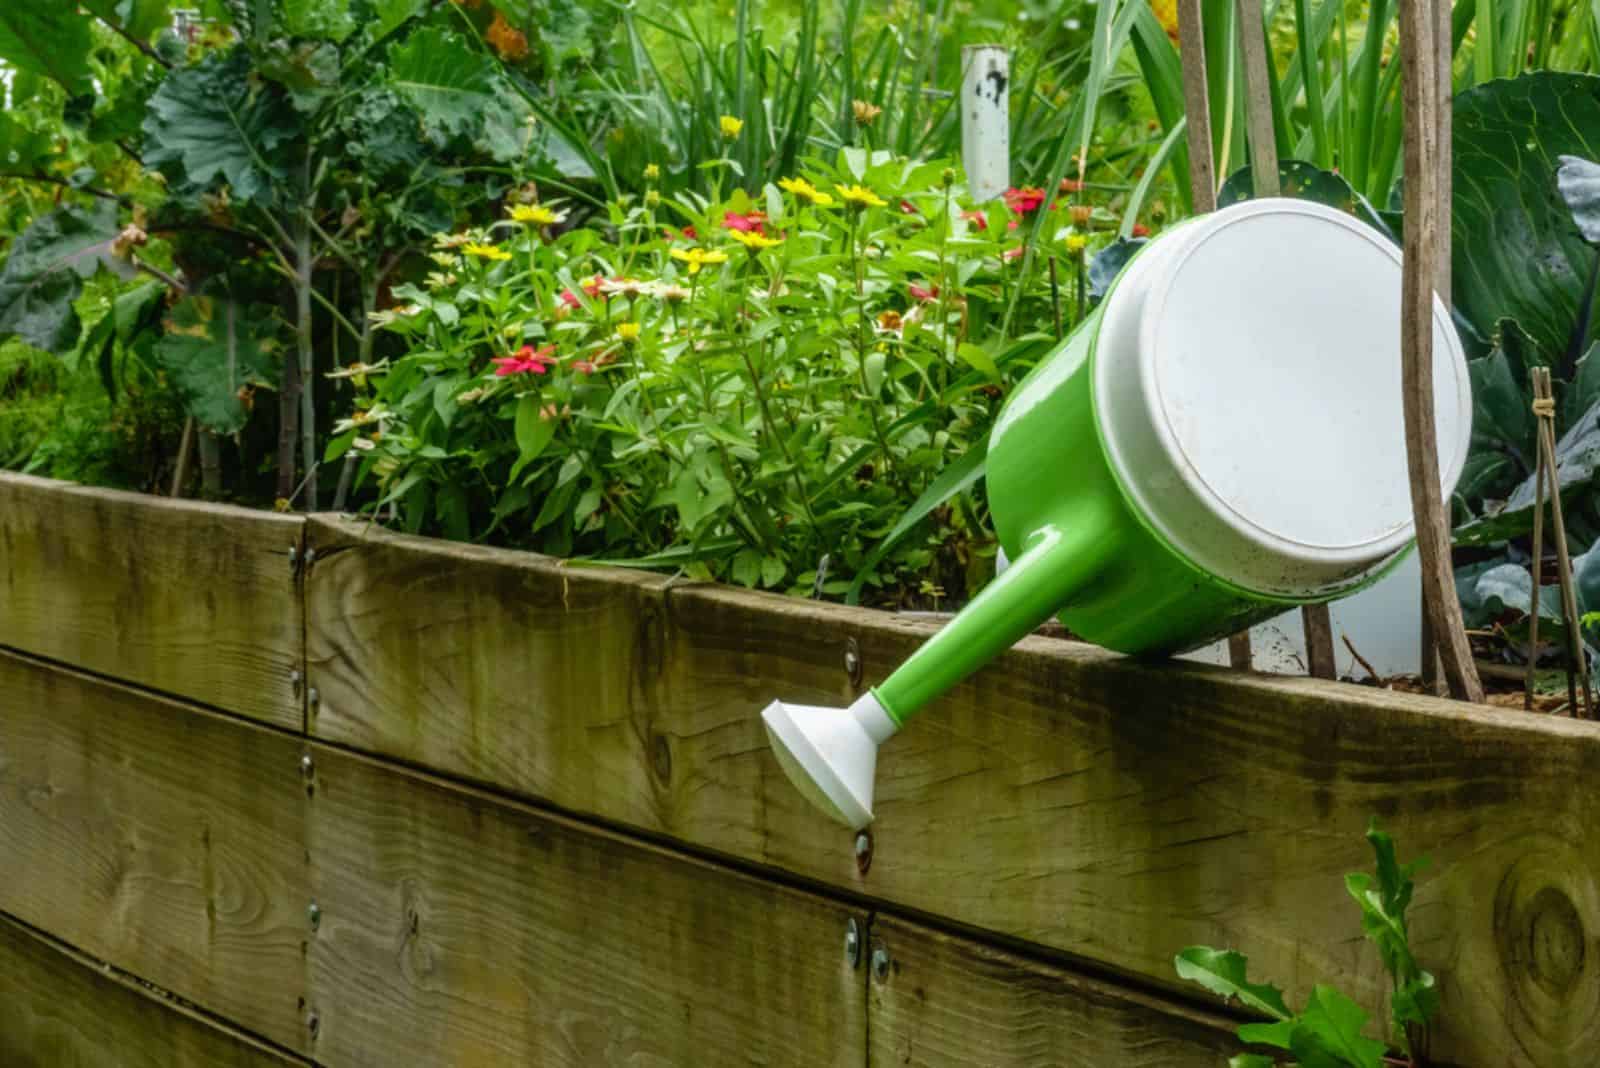 Overturned green and white plastic watering can on top edge of raised garden bed in summer